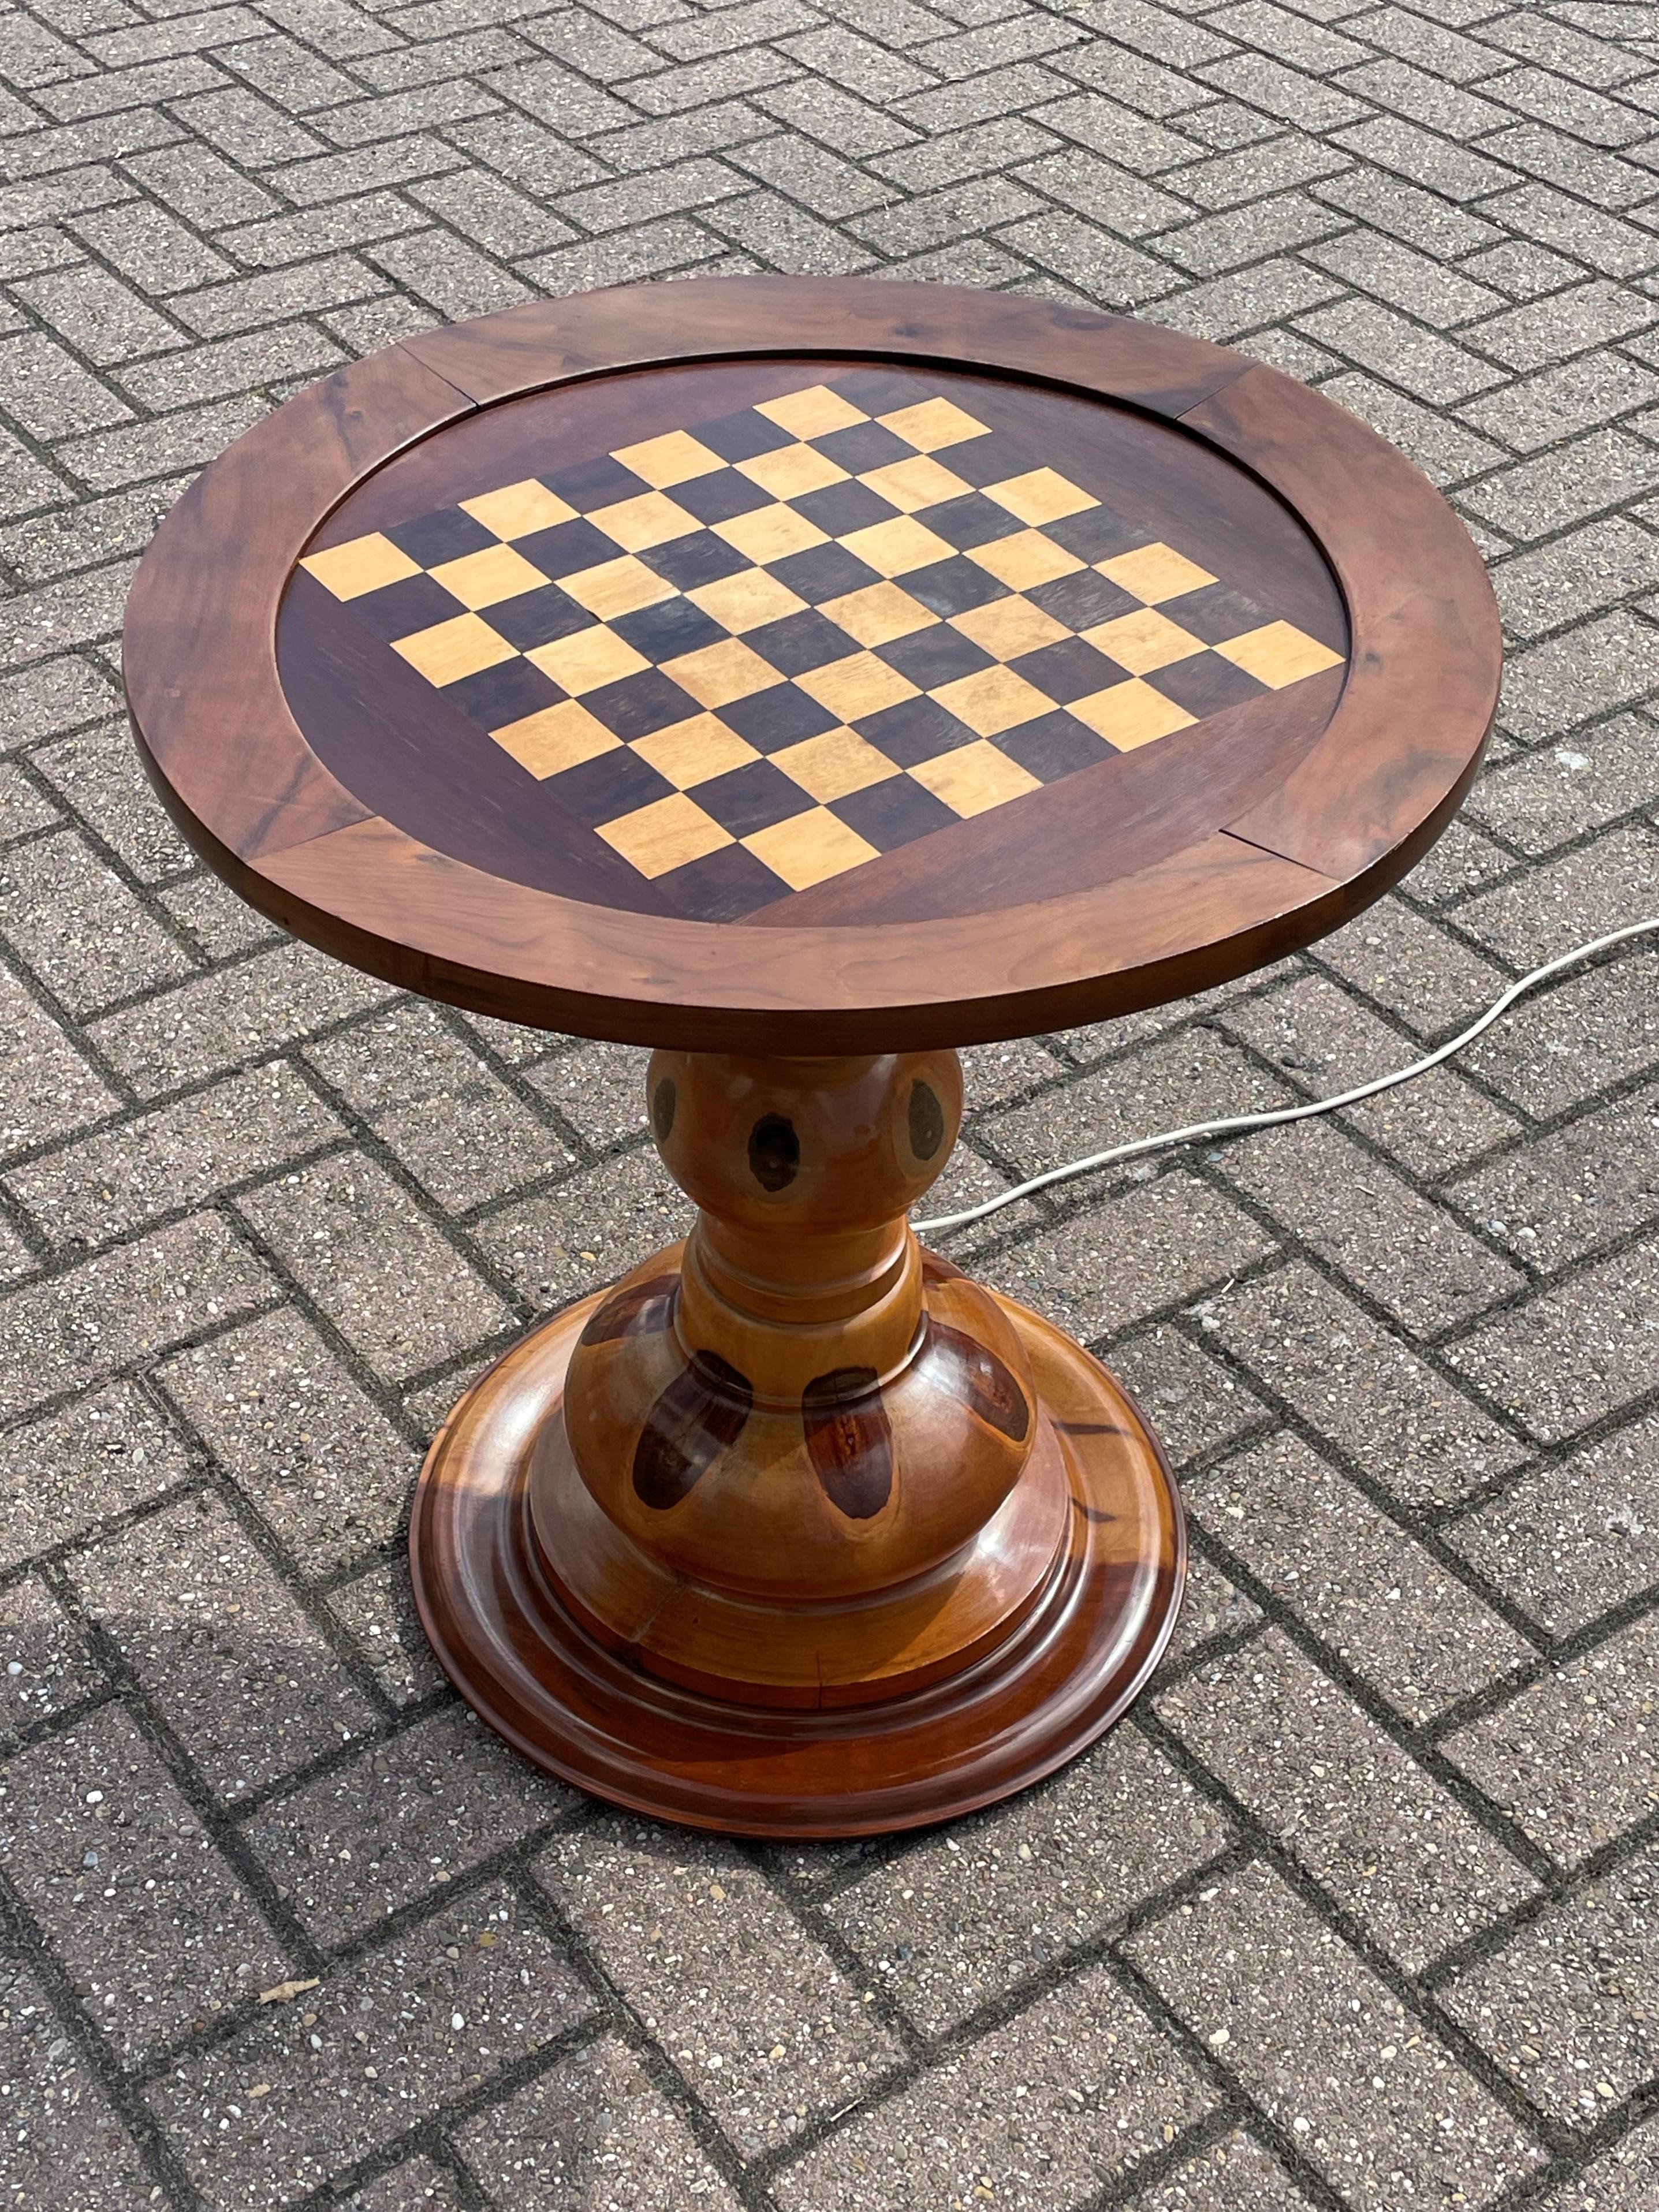 Rare design and great looking, handcrafted wooden chess table with unique natural patterns and colors.

This midcentury era chess table (with built-in lamp in the base) has some of the most beautiful, natural colors ever. We don't know what type